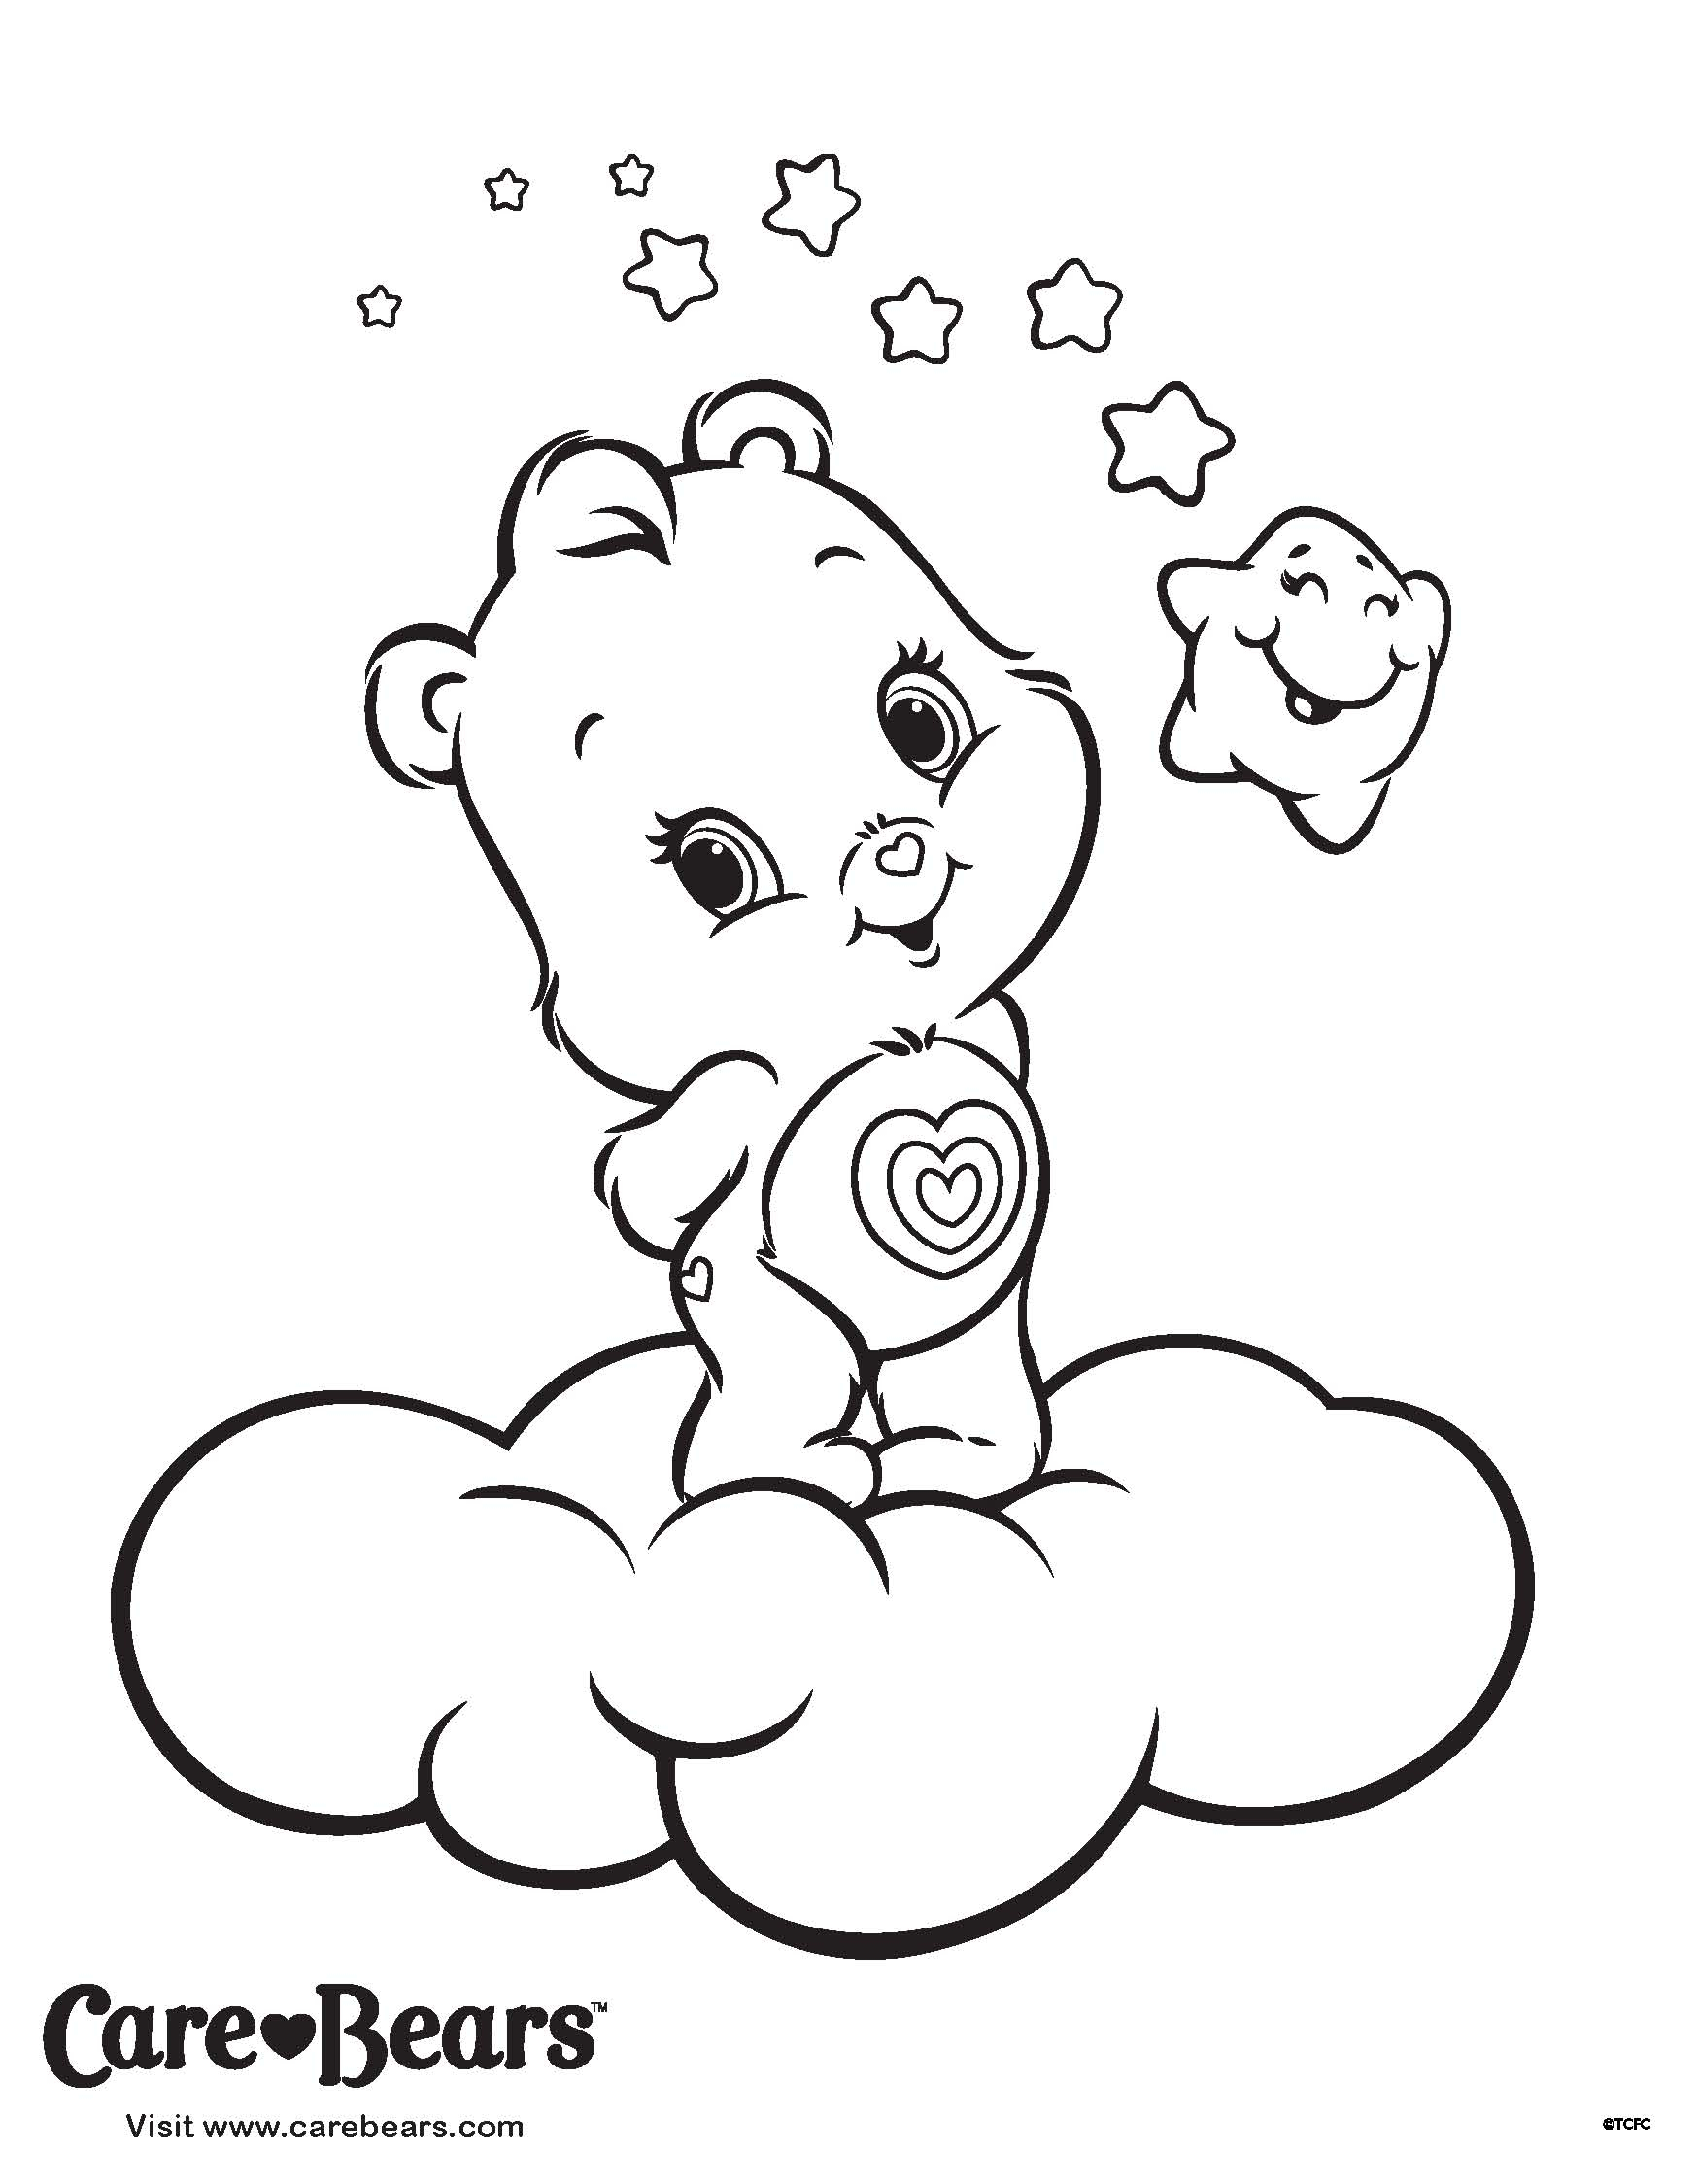 Free Care Bear Coloring Pages Coloring Books Care Bear Coloring Pages To Download And Print For